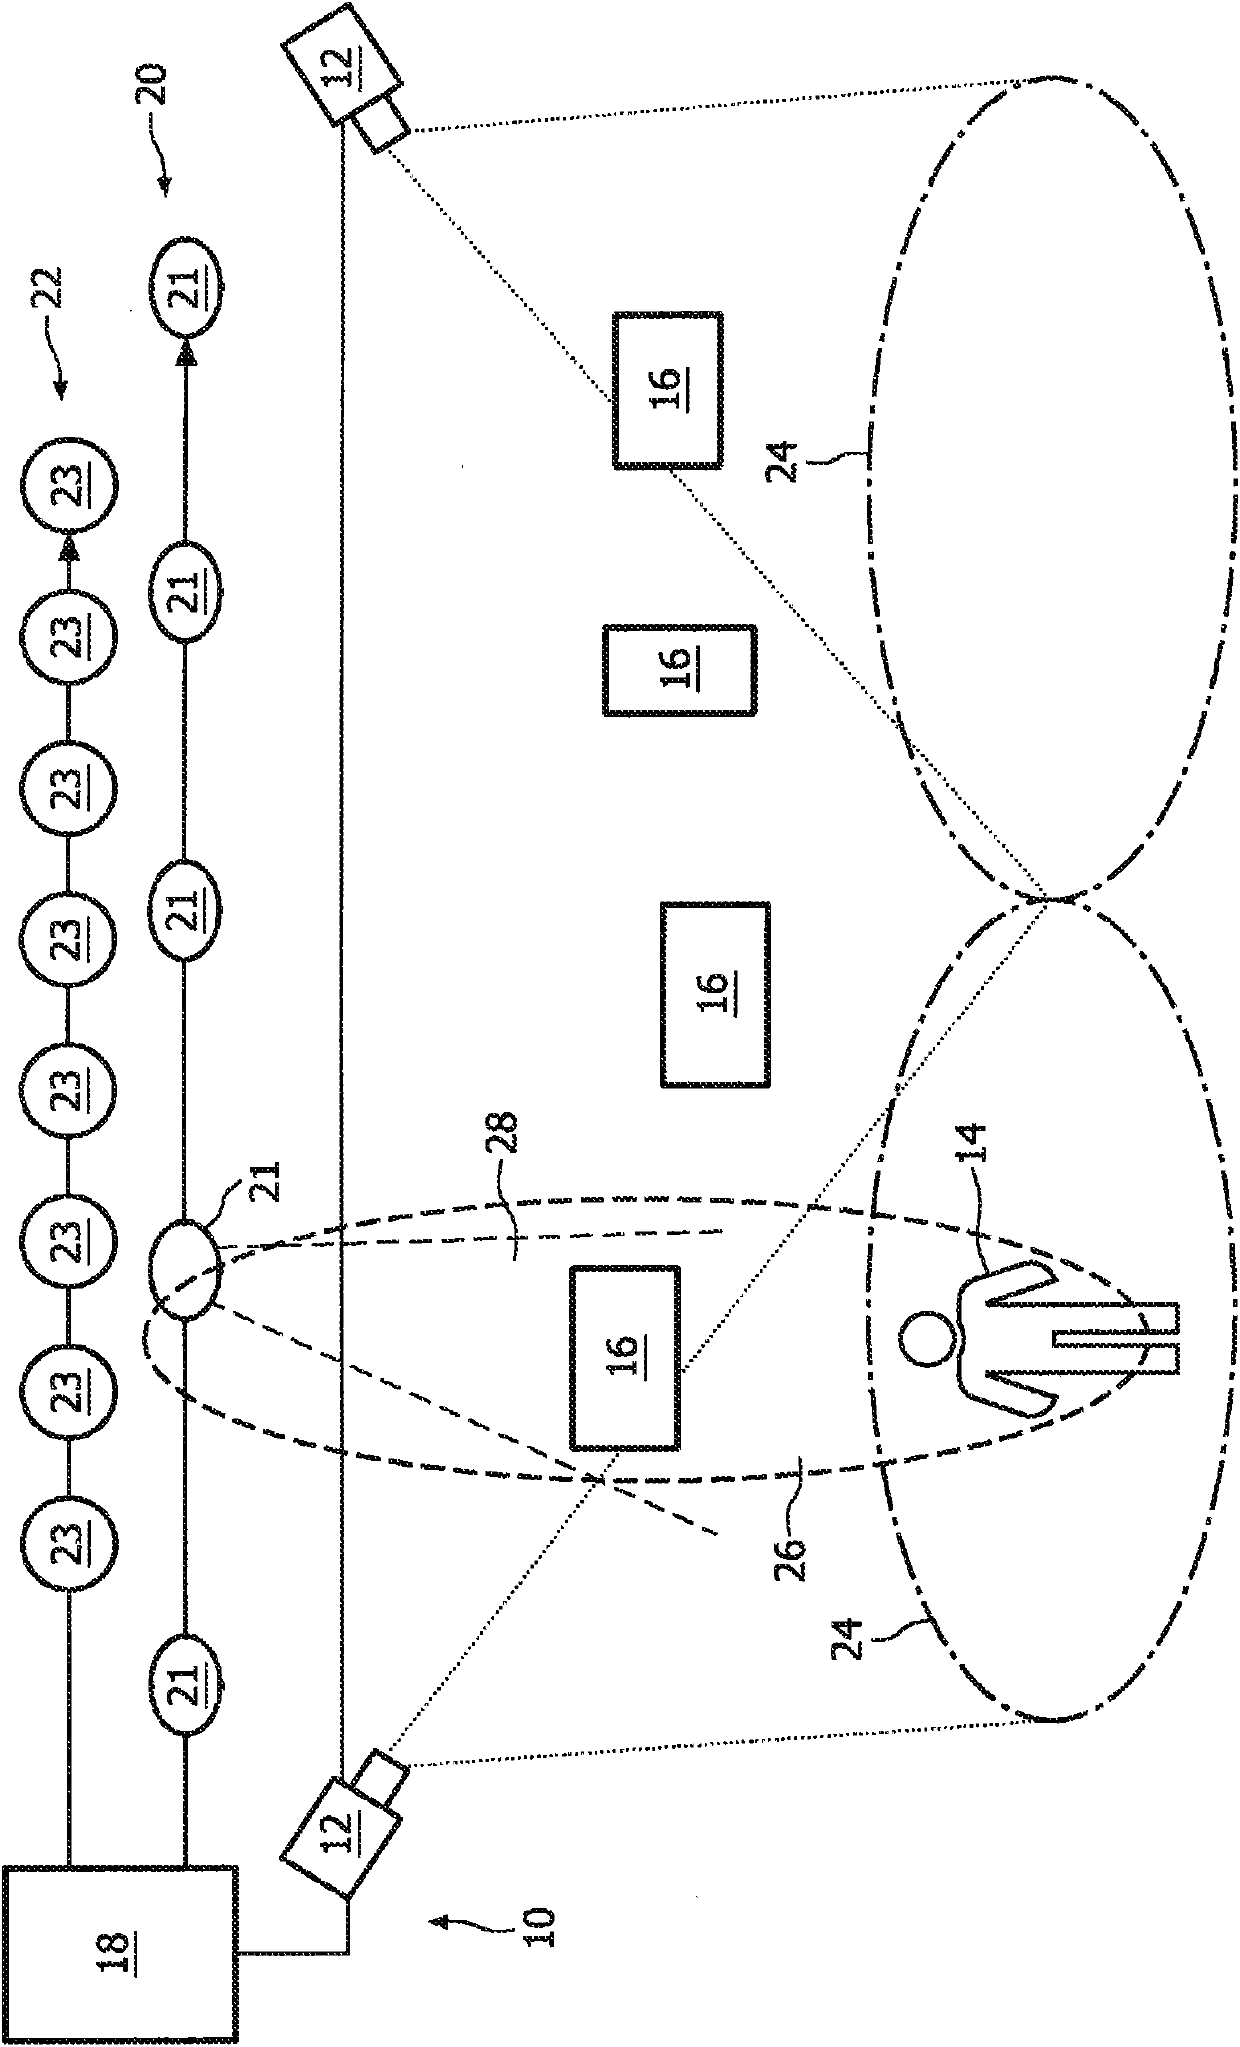 An interaction system and method